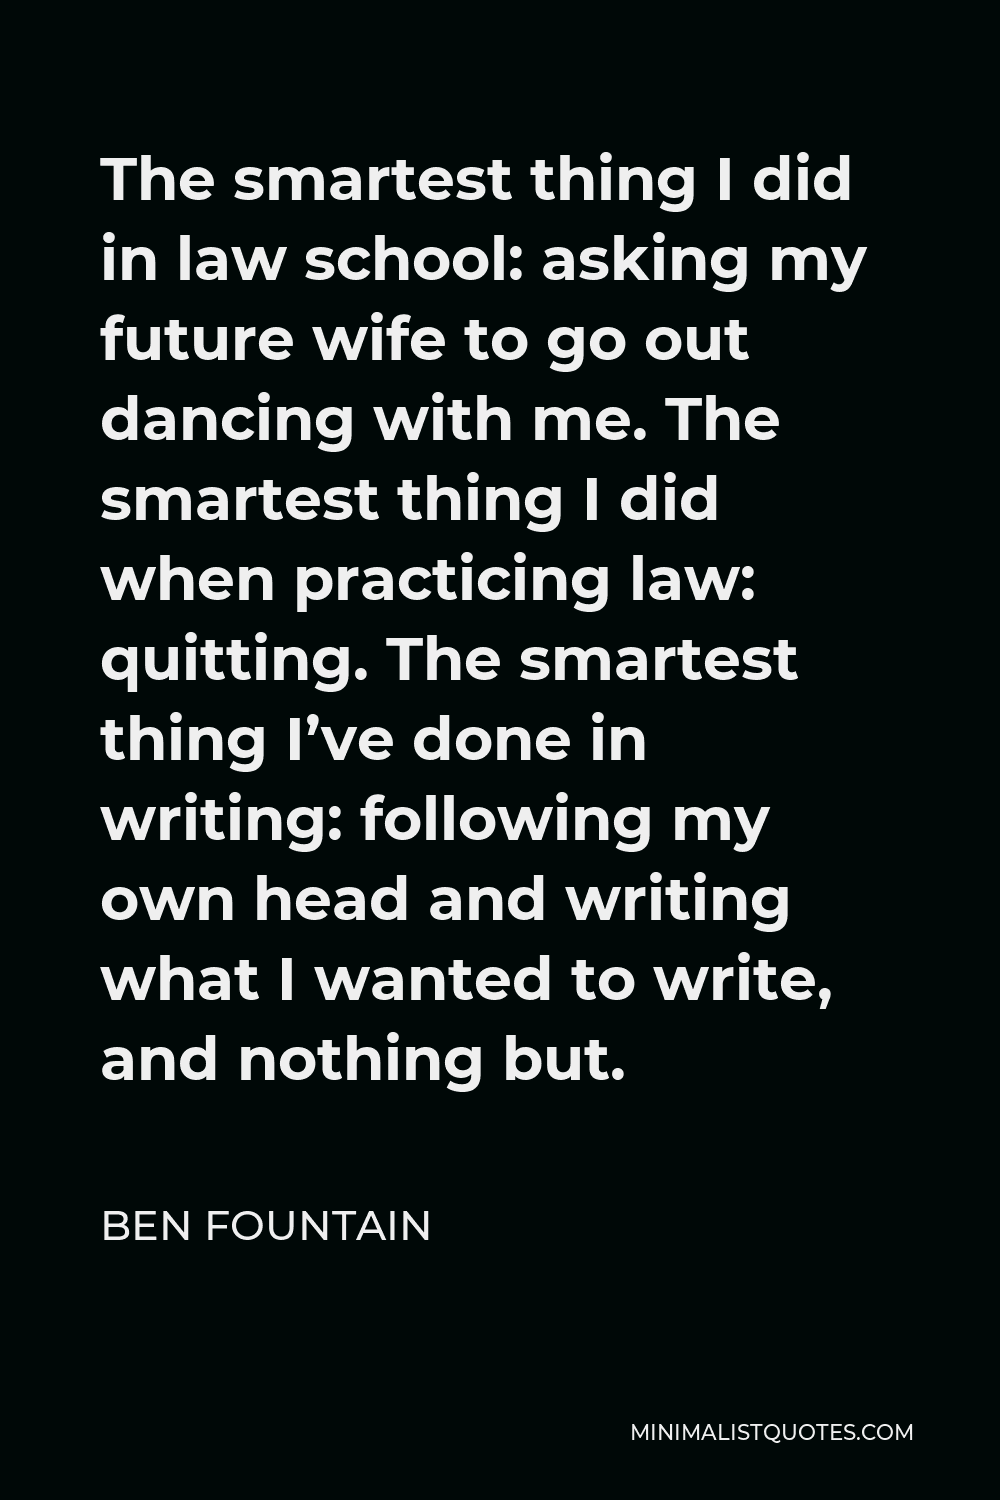 Ben Fountain Quote - The smartest thing I did in law school: asking my future wife to go out dancing with me. The smartest thing I did when practicing law: quitting. The smartest thing I’ve done in writing: following my own head and writing what I wanted to write, and nothing but.